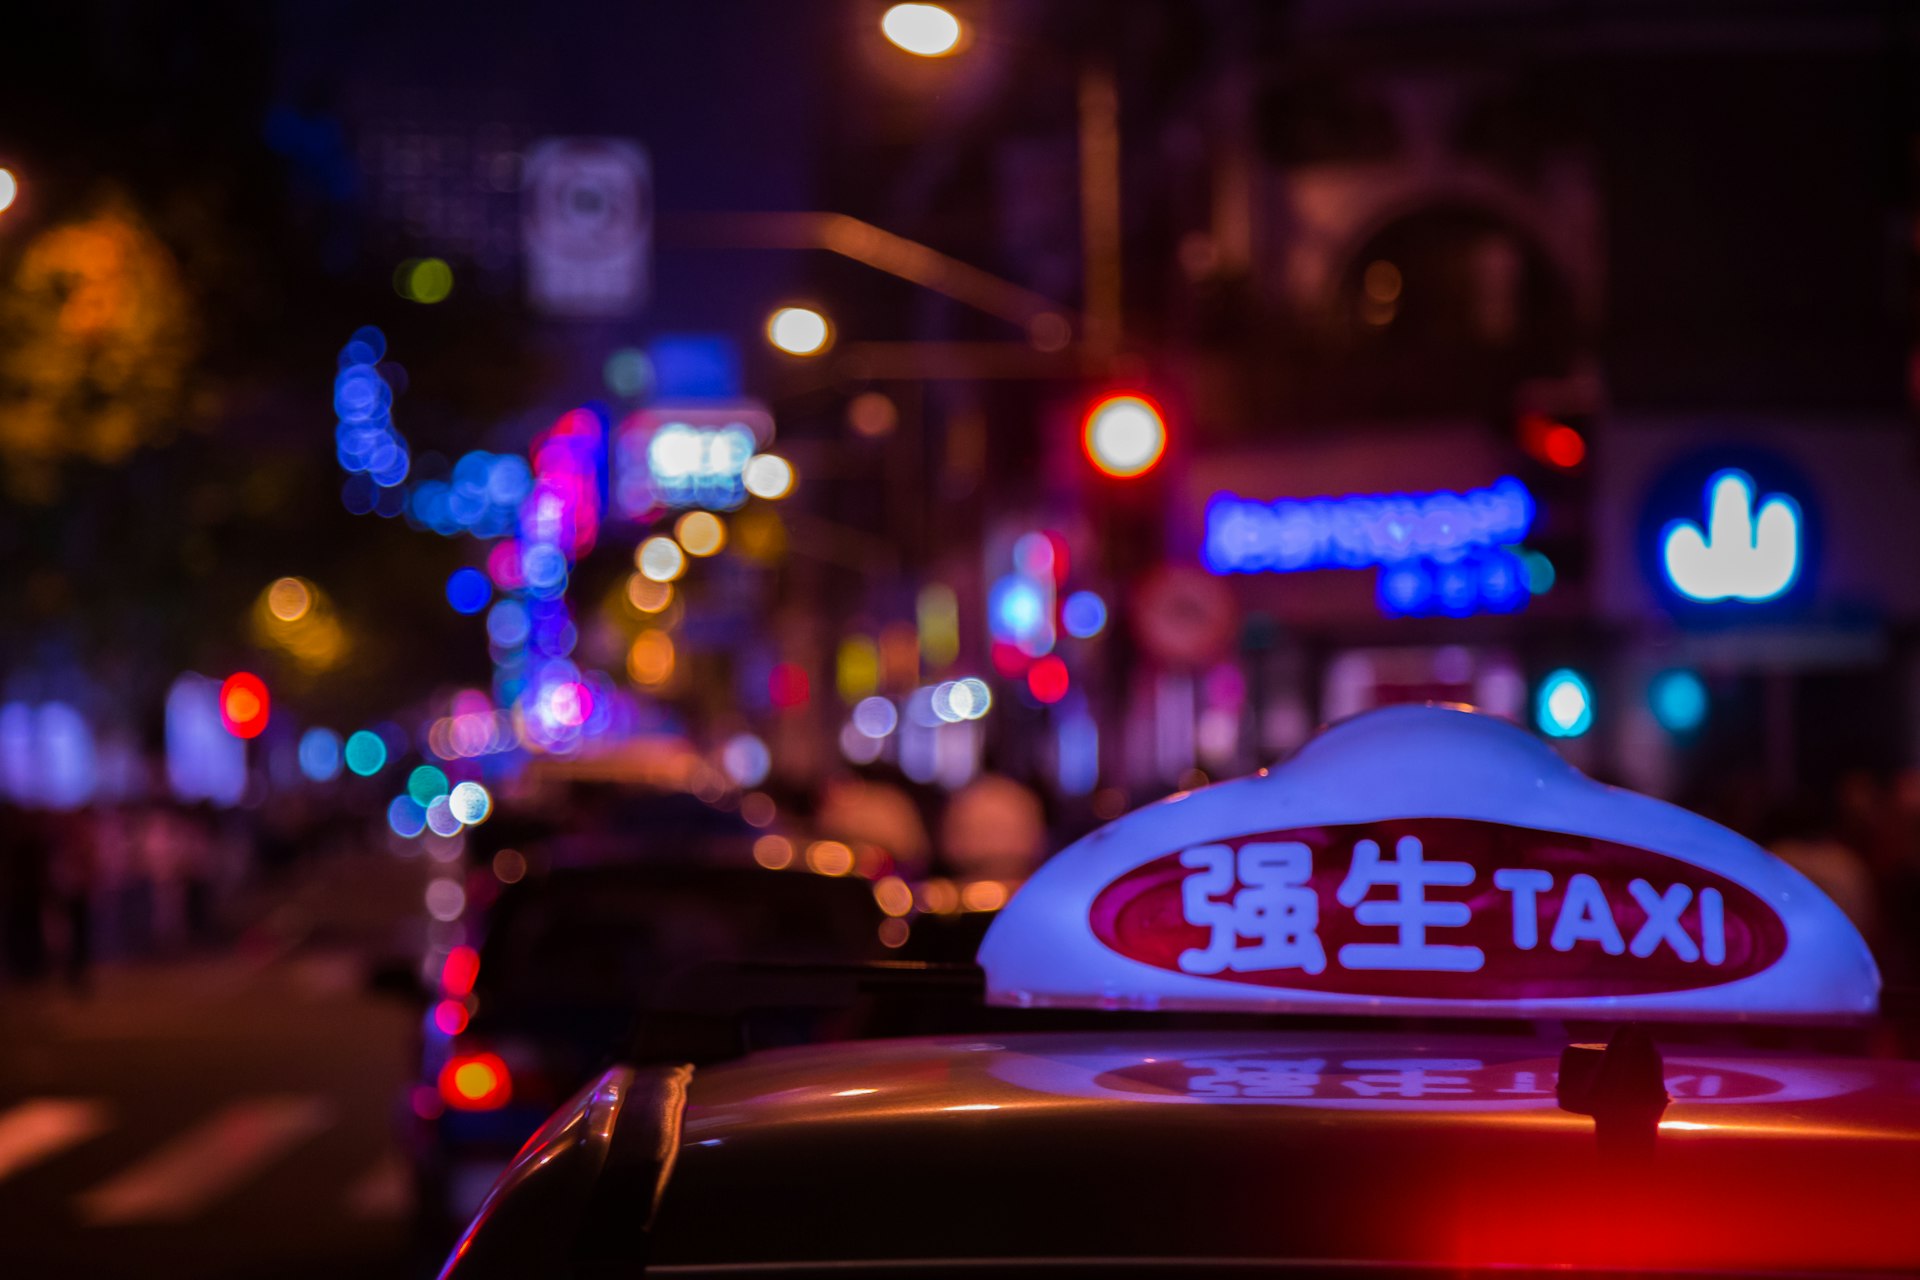 Shanghai taxi at night in the streets of the city 